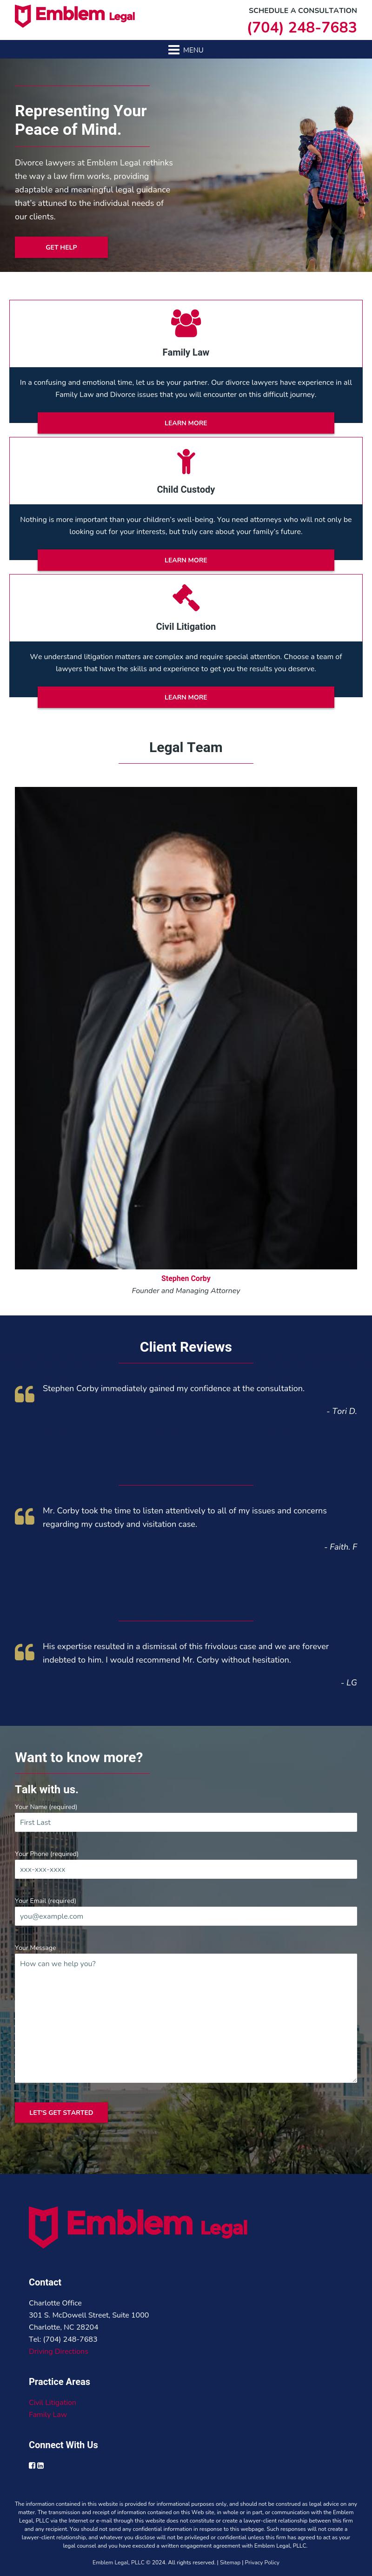 The Law Office of Stephen M. Corby, PPLC - Charlotte NC Lawyers